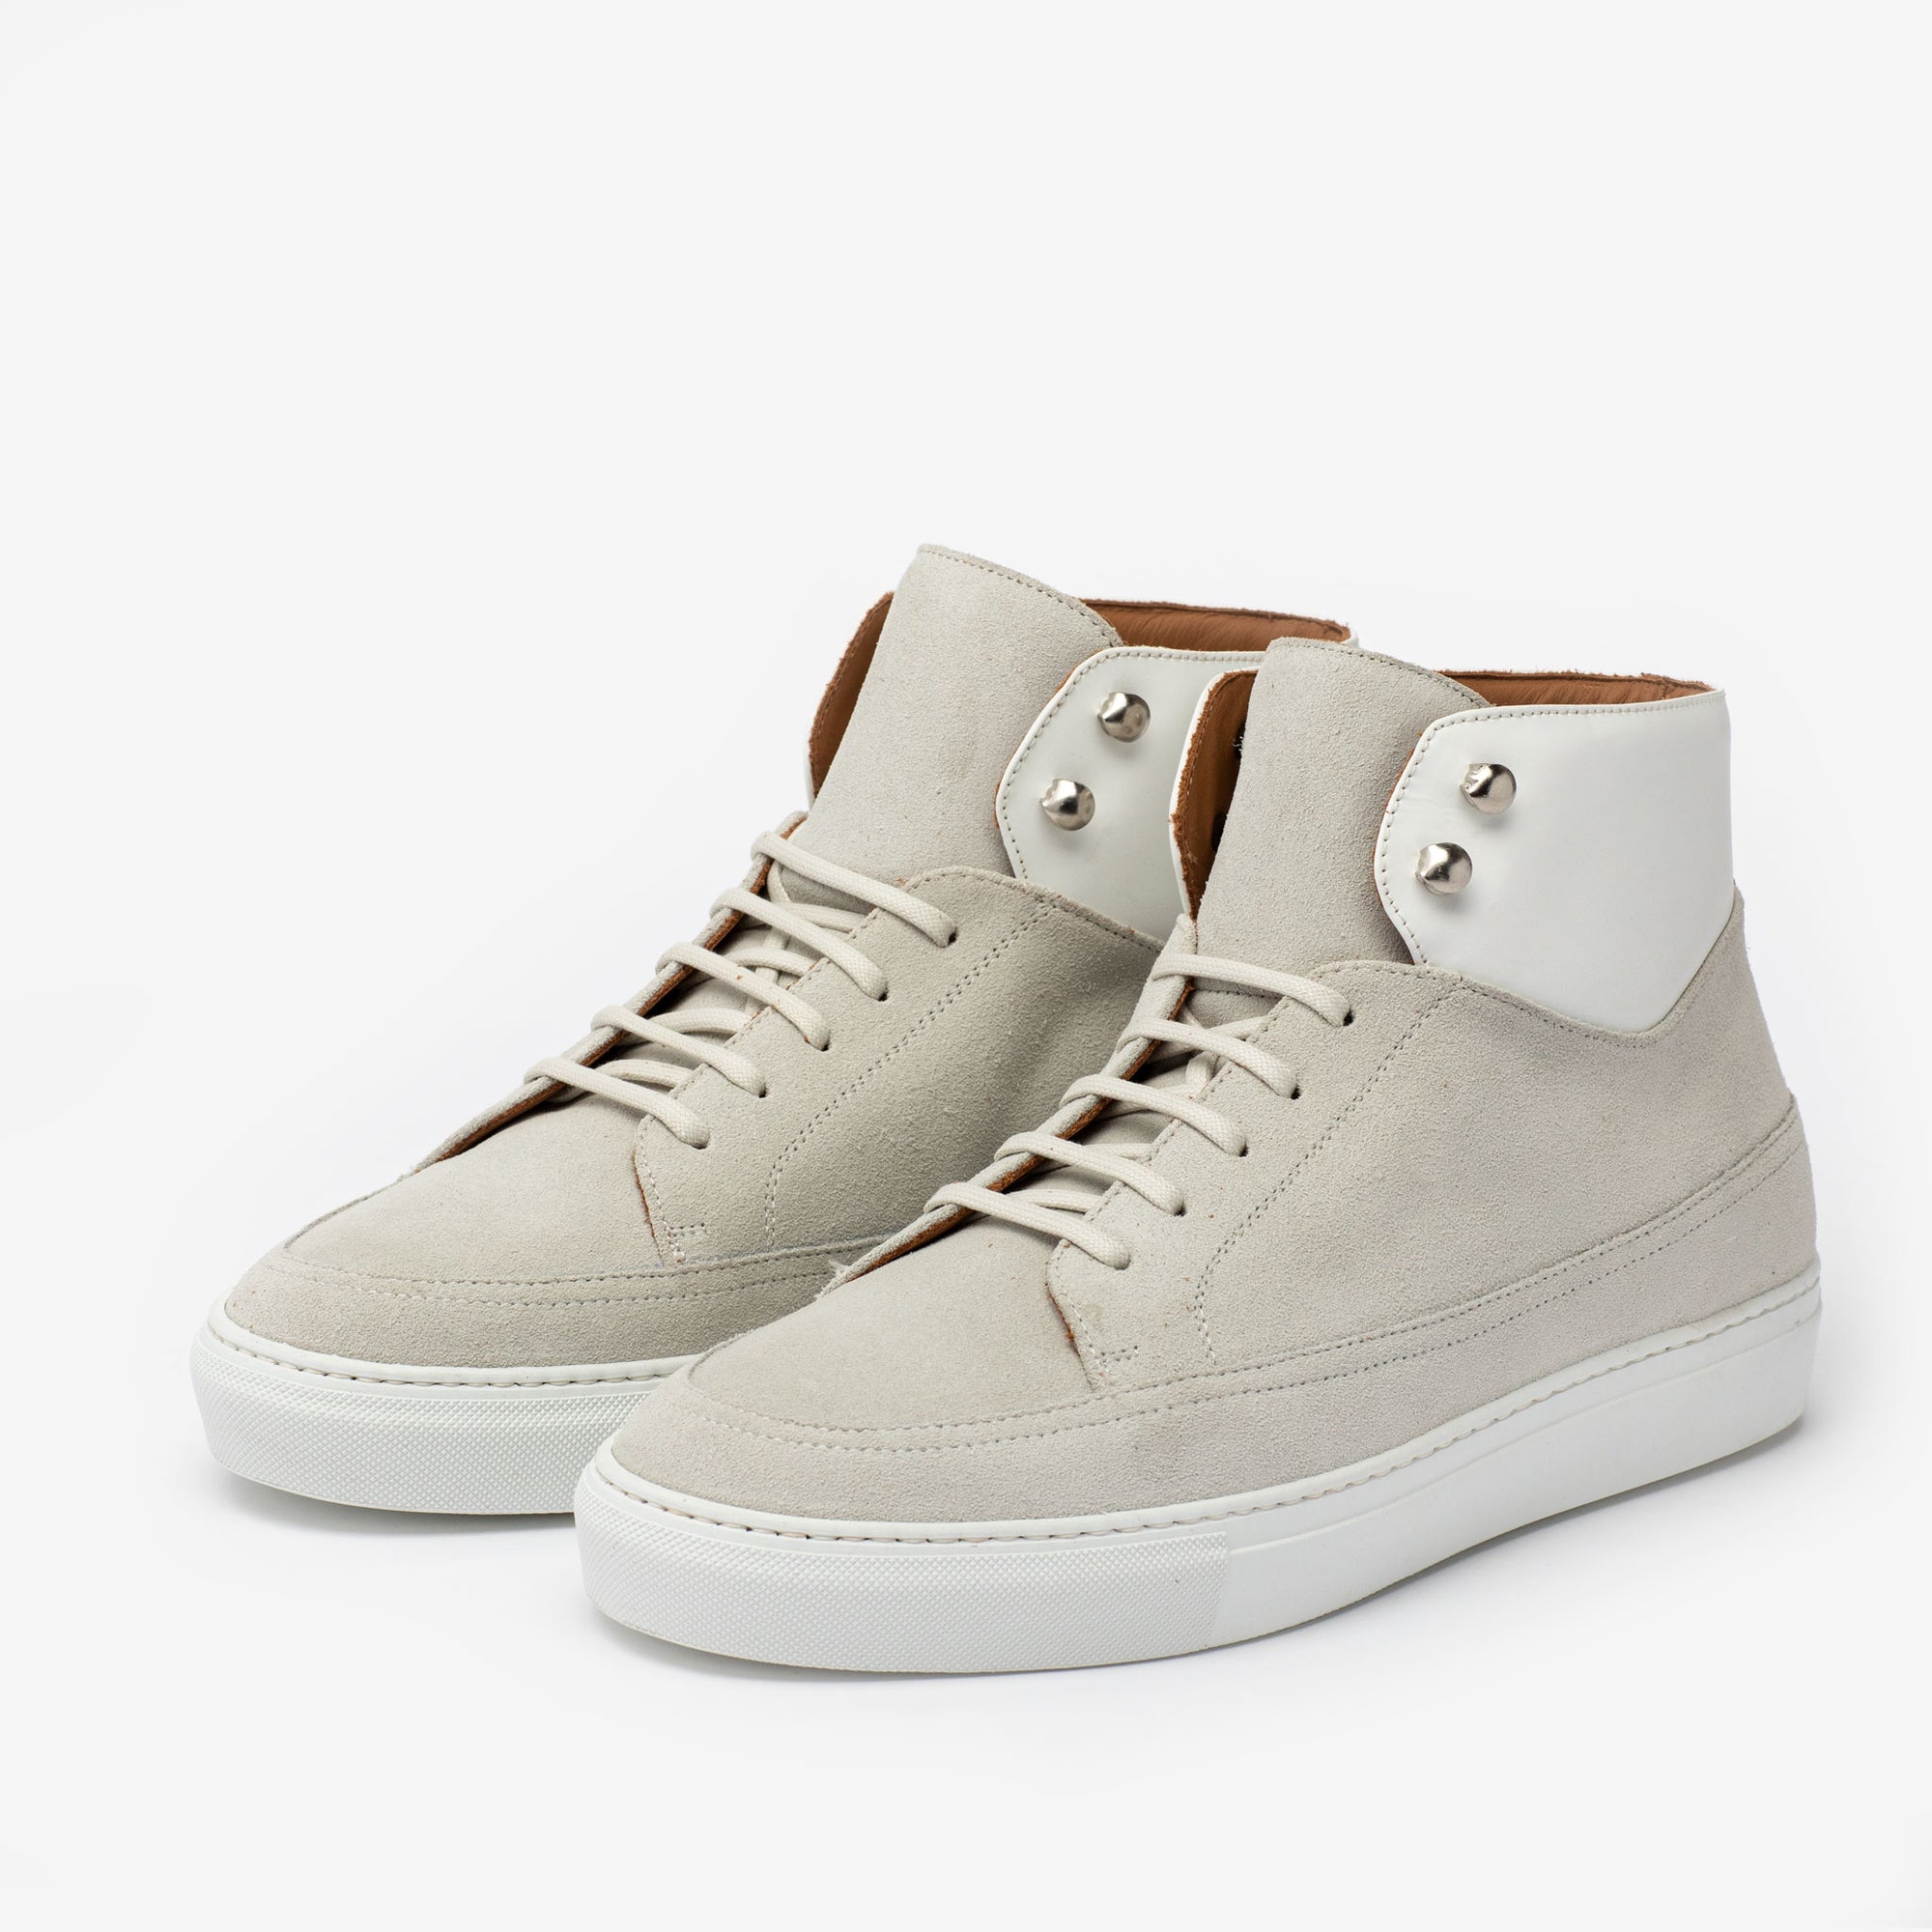 The Fifth Ave Hightop Sneaker in Cream {{rollover}}